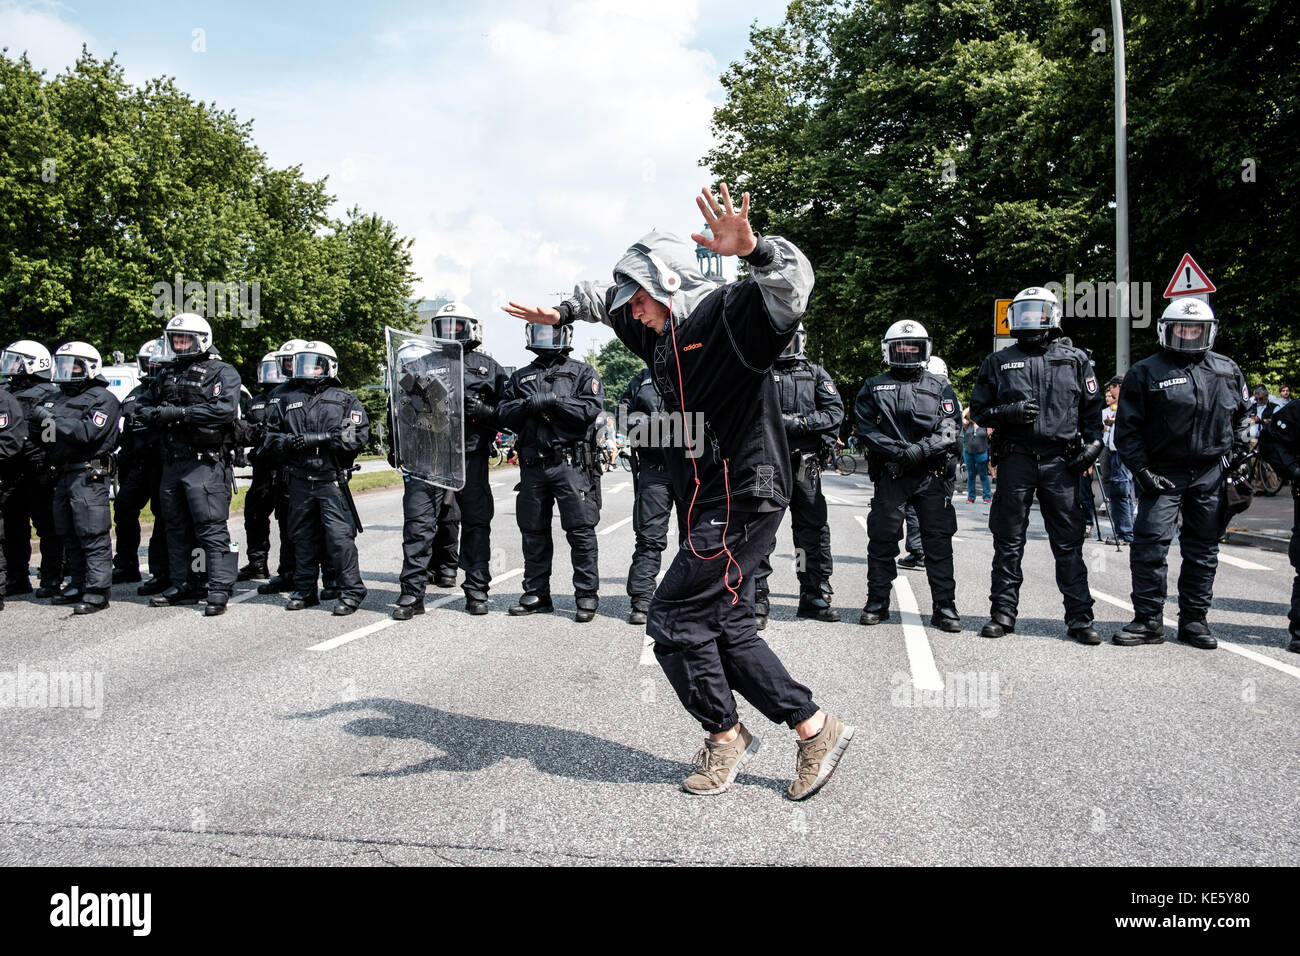 HAMBURG, JULY 7, 2017: Guy dance in front of policemen to demonstrate against G20 summit in Hamburg, Germany. Stock Photo